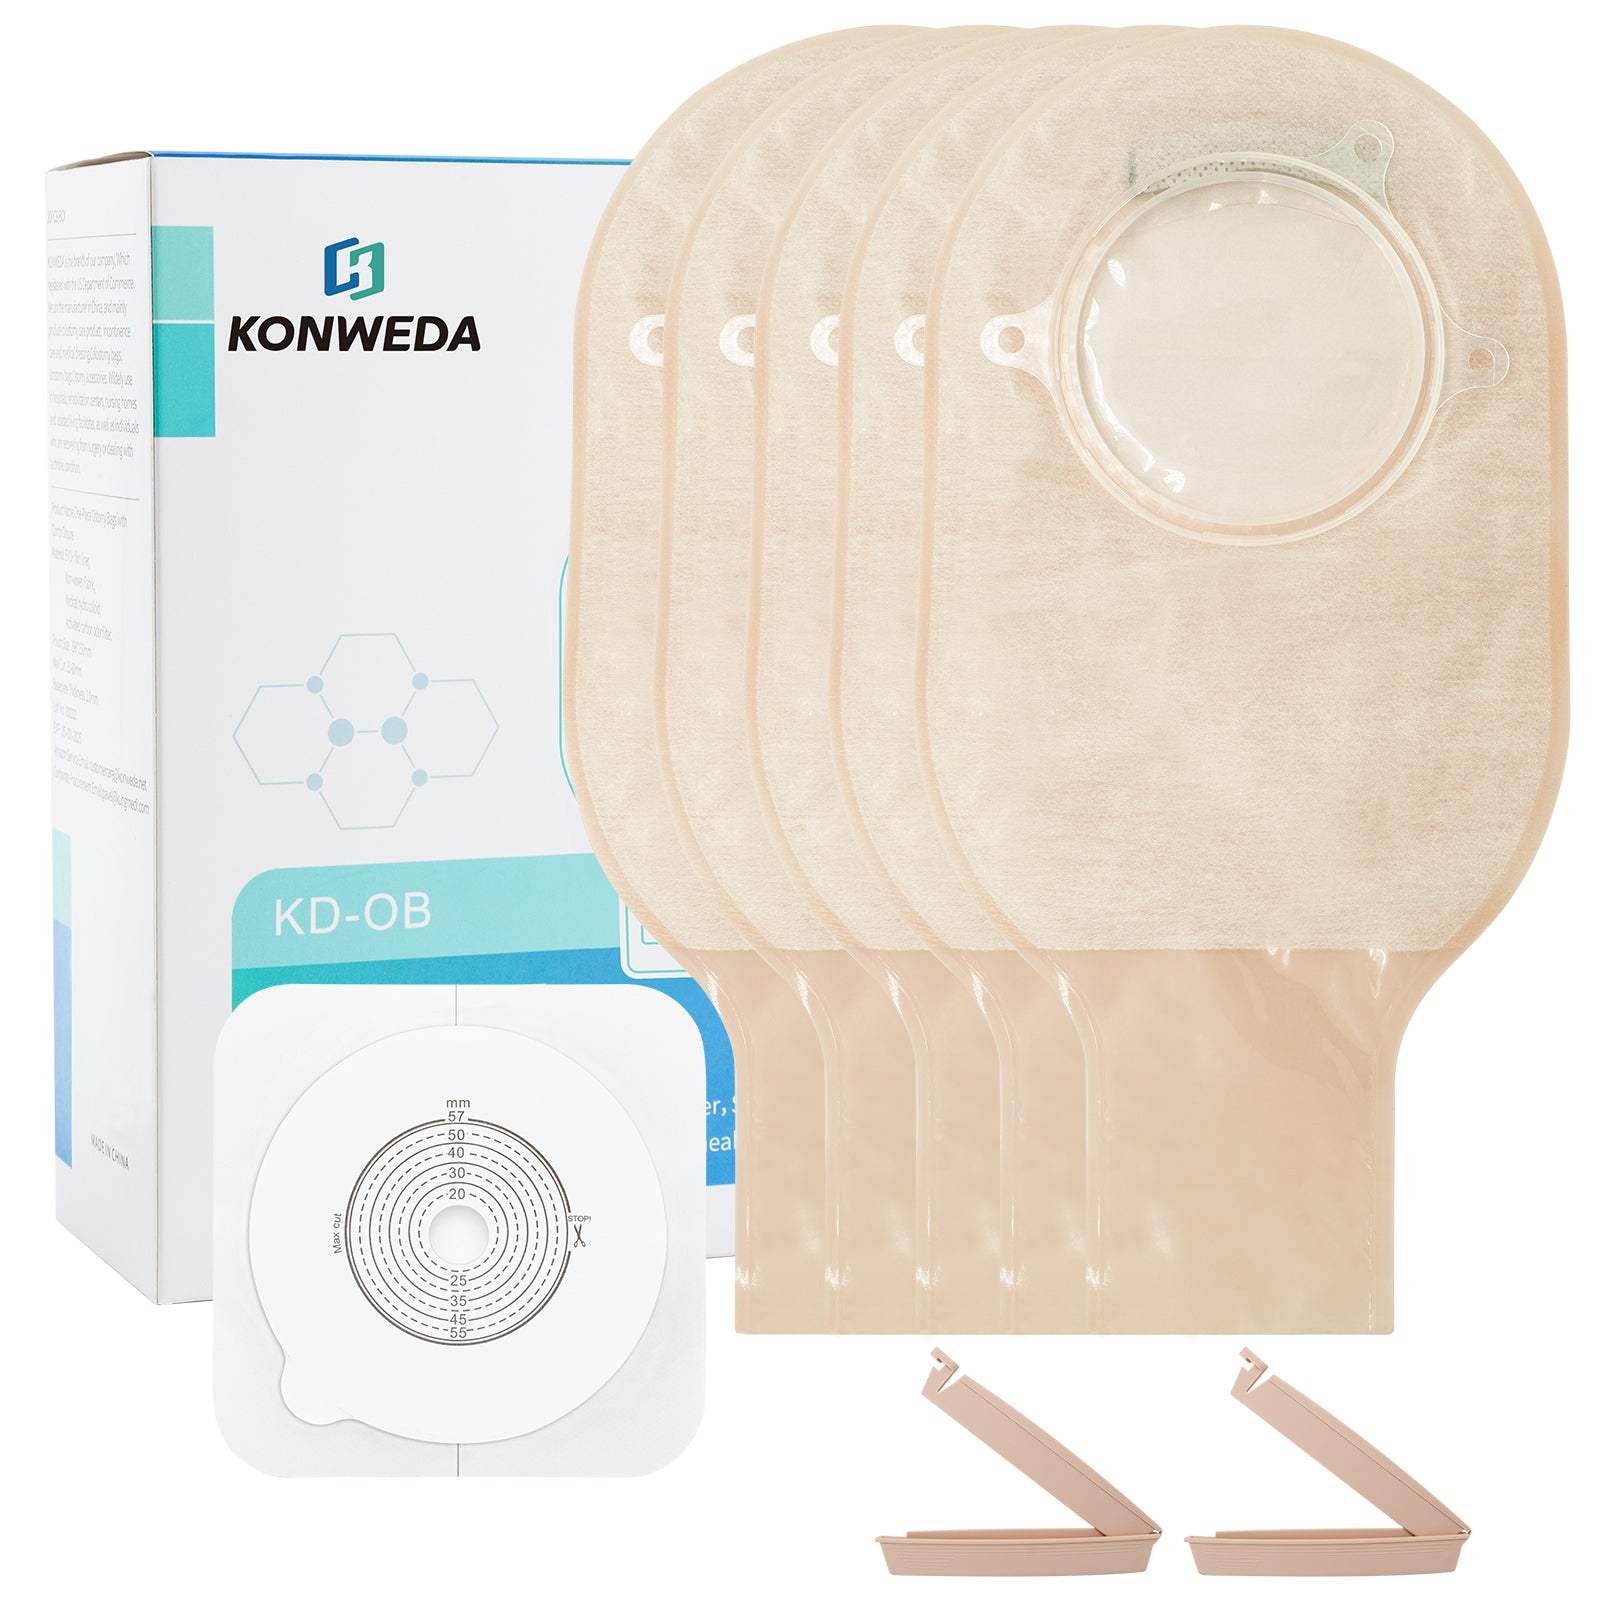 Ostomy Depot - Wide inventory of ostomy supplies at low cost